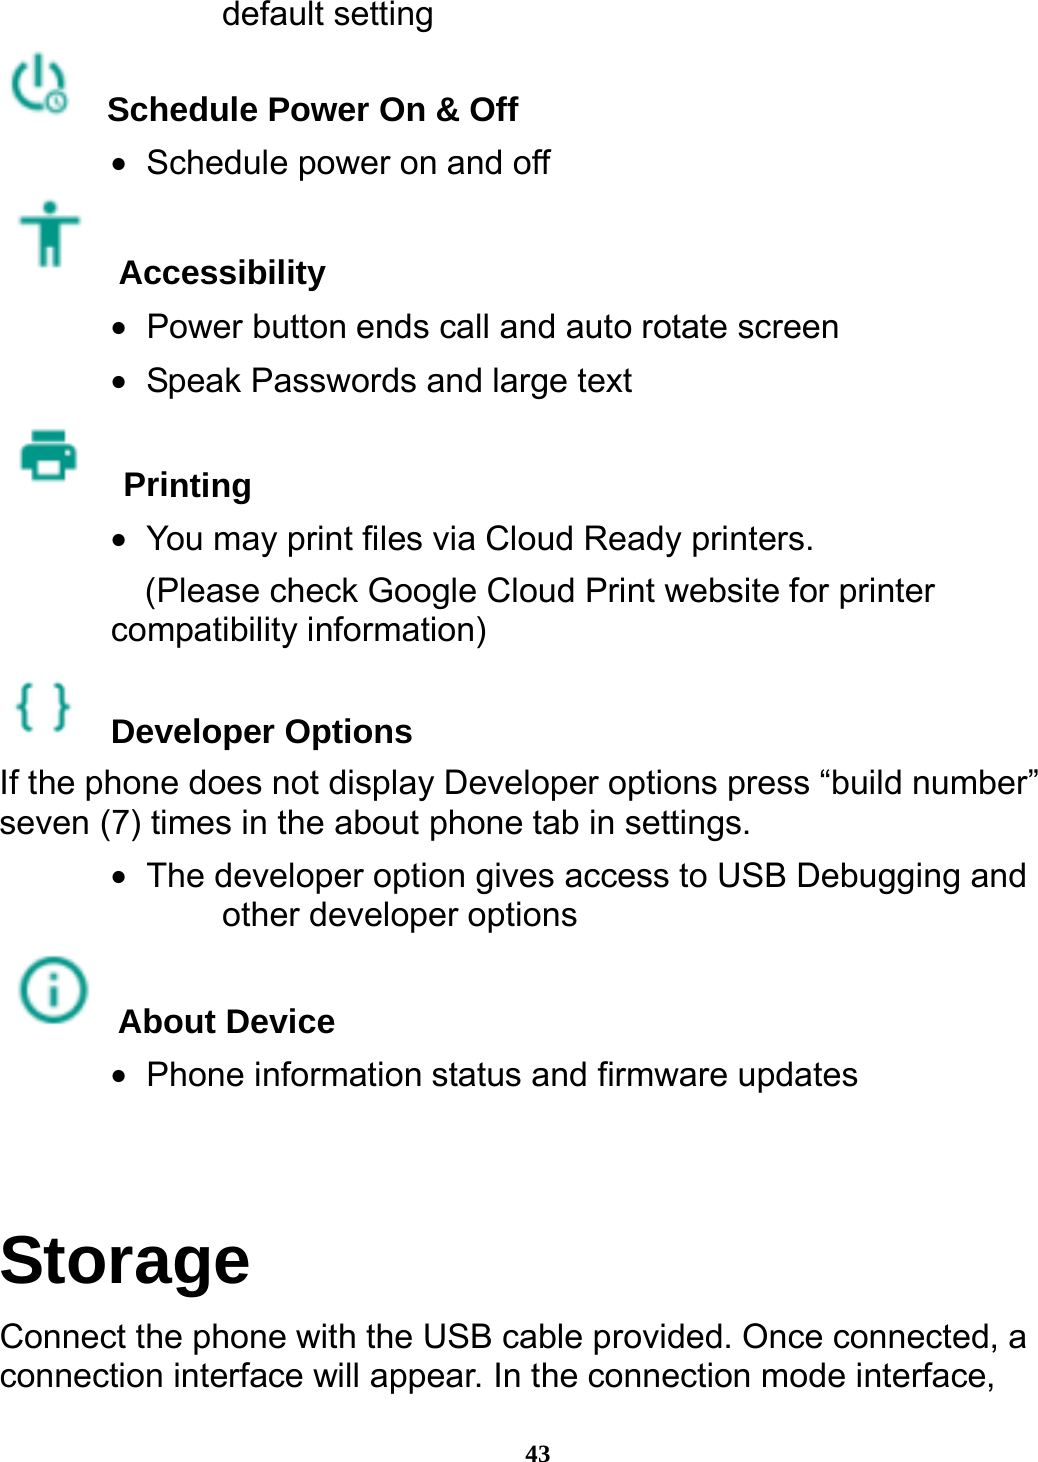  43 default setting  Schedule Power On &amp; Off •   Schedule power on and off  Accessibility  •   Power button ends call and auto rotate screen •   Speak Passwords and large text  Printing  •   You may print files via Cloud Ready printers.     (Please check Google Cloud Print website for printer compatibility information)    Developer Options  If the phone does not display Developer options press “build number” seven (7) times in the about phone tab in settings.   •   The developer option gives access to USB Debugging and other developer options  About Device  •   Phone information status and firmware updates  Storage Connect the phone with the USB cable provided. Once connected, a connection interface will appear. In the connection mode interface, 